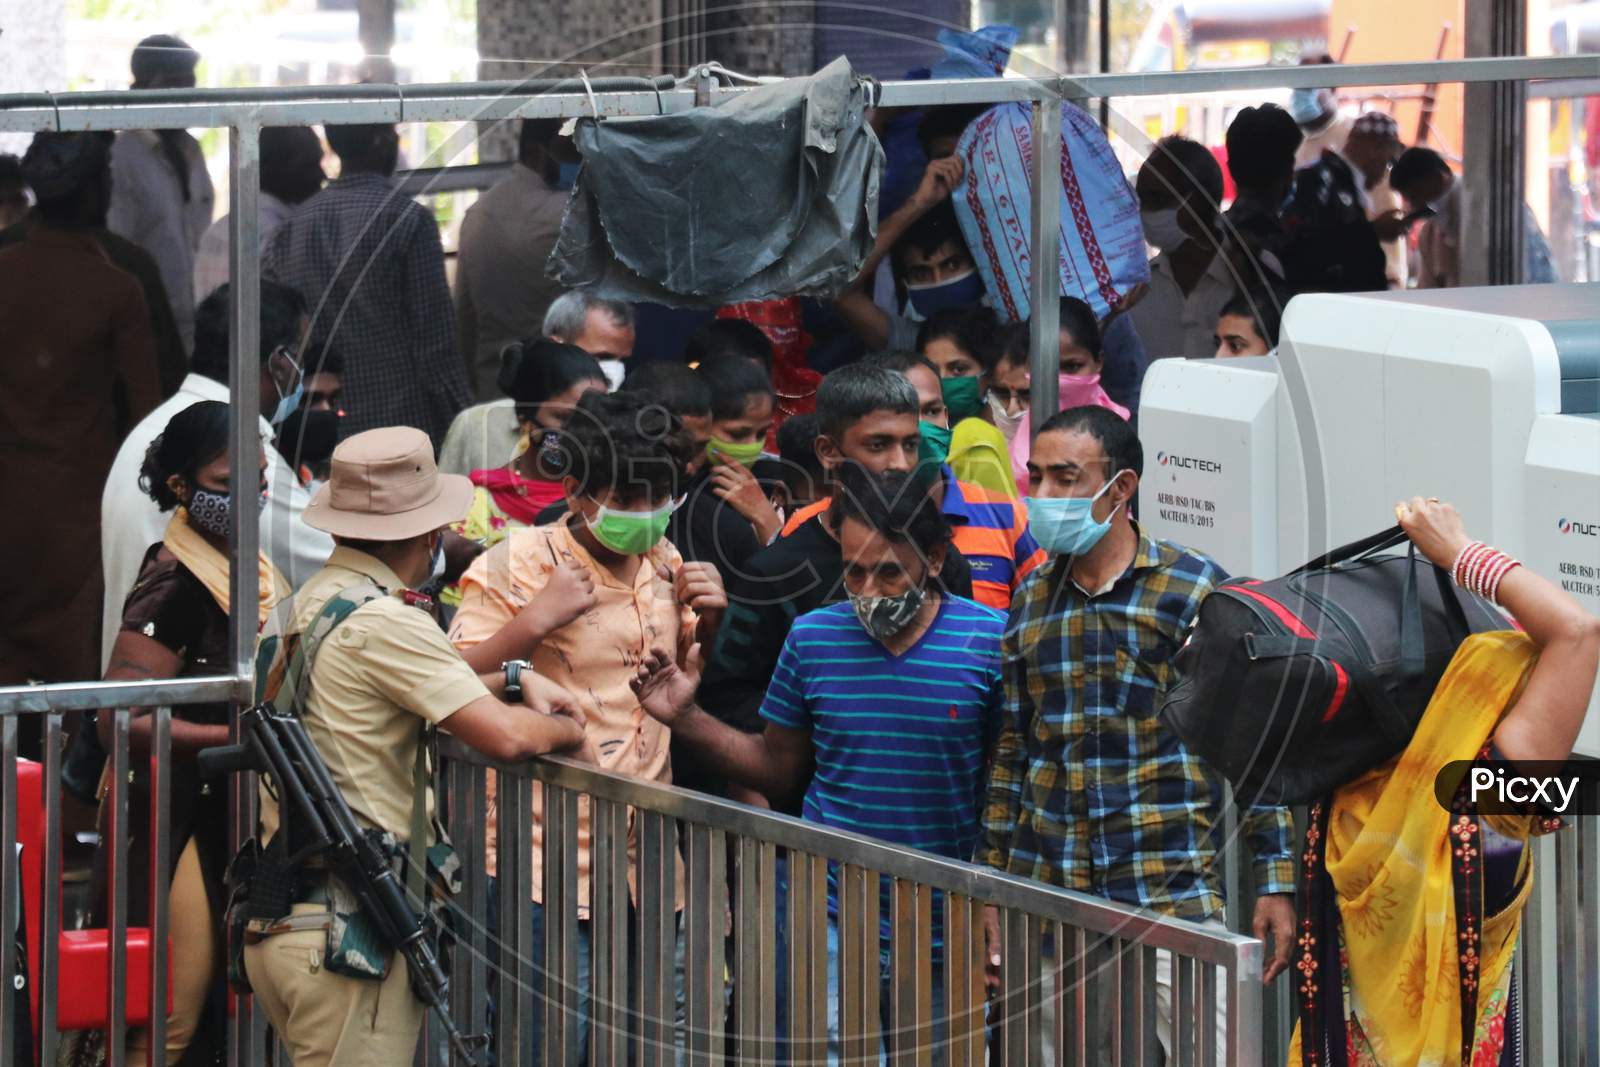 People wearing protective masks arrive at a railway station, amid the spread of the coronavirus disease (COVID-19), in Mumbai, India, November, 2020.